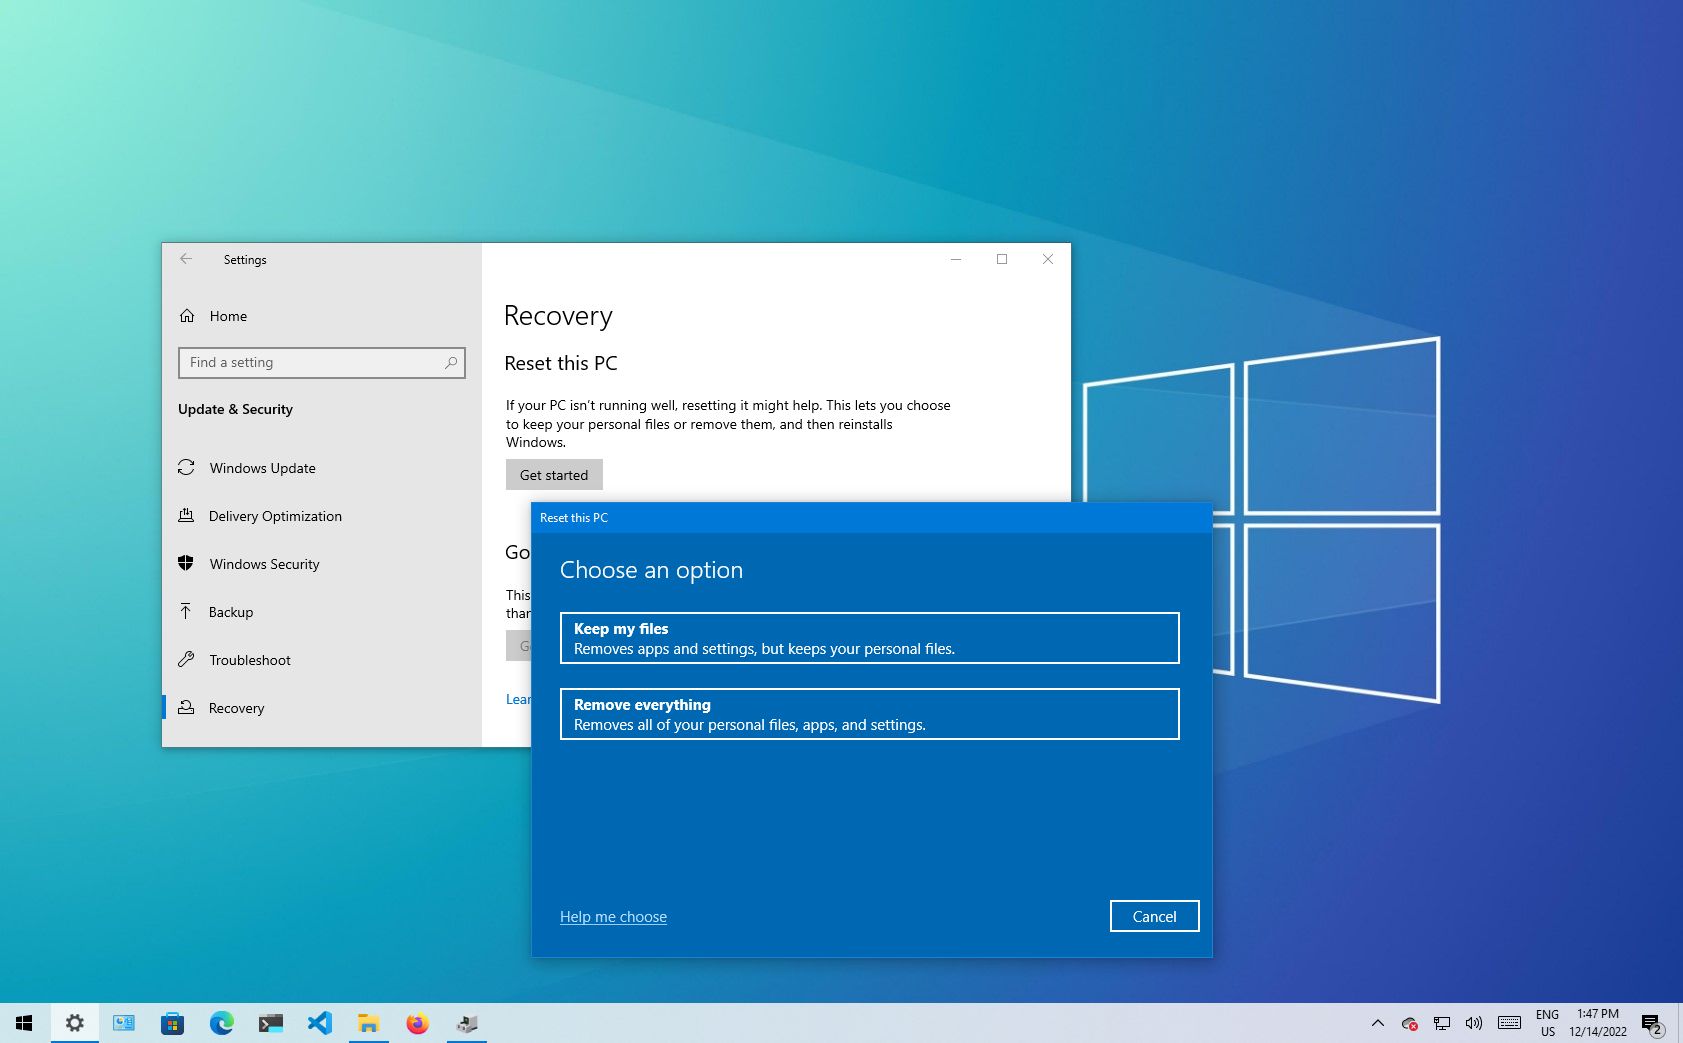 Step-by-Step Guide on How to Factory Reset Windows 10 - Accessing Windows Settings